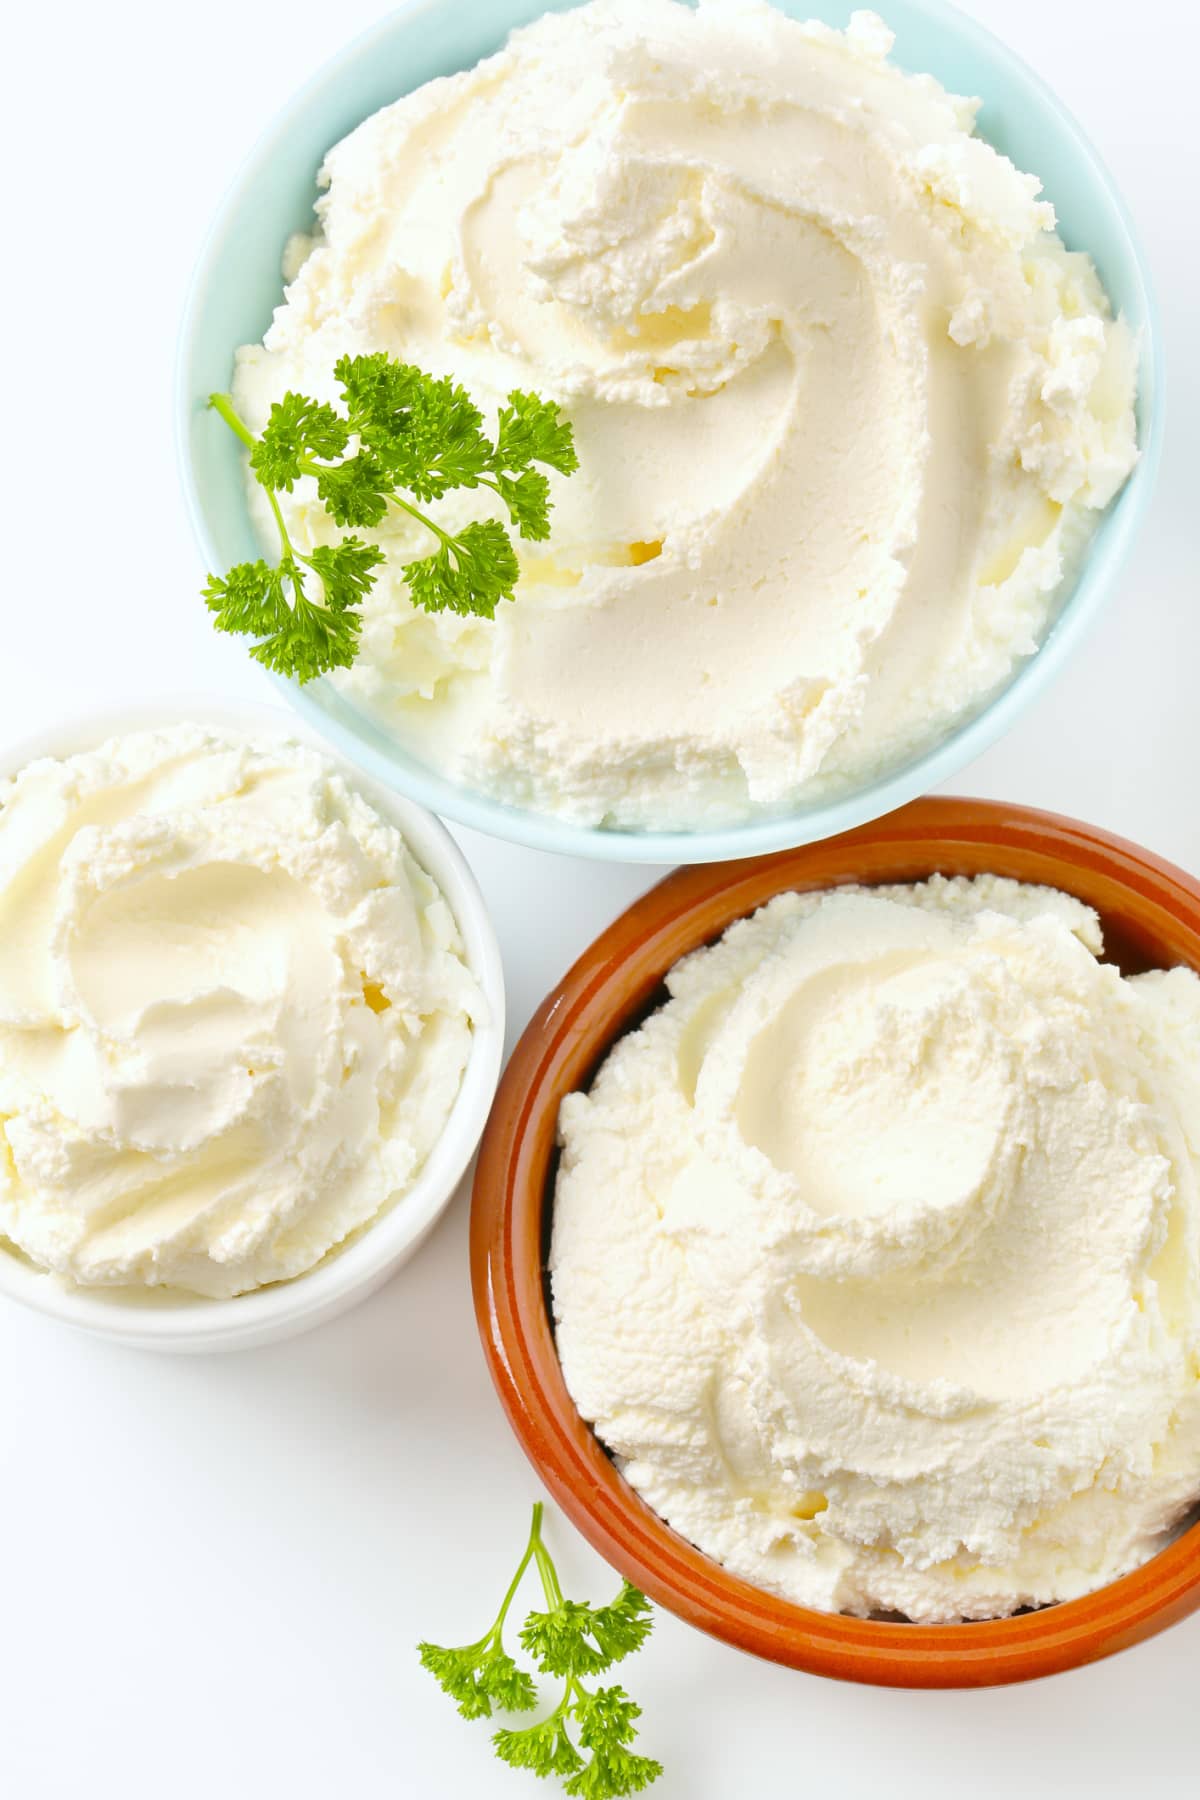 Cream cheese in various ceramic bowls on a white background